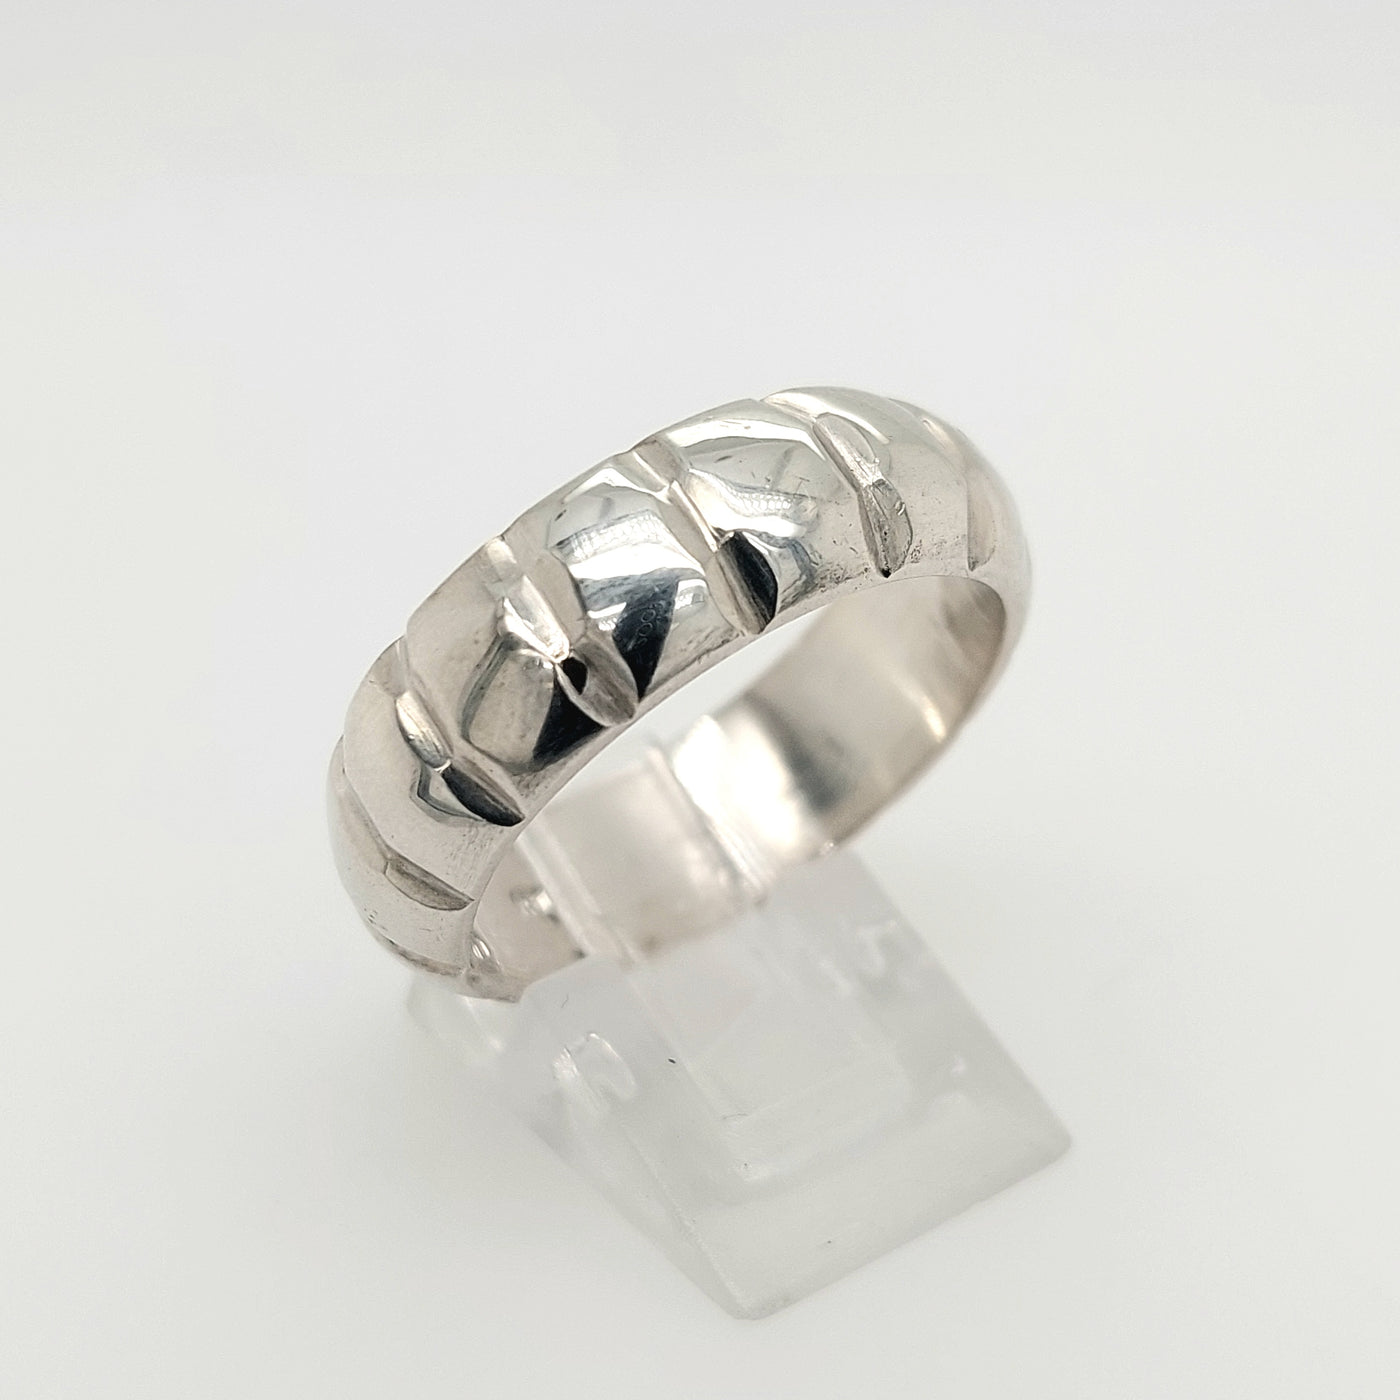 SS Domed Section Ring Size:11.75